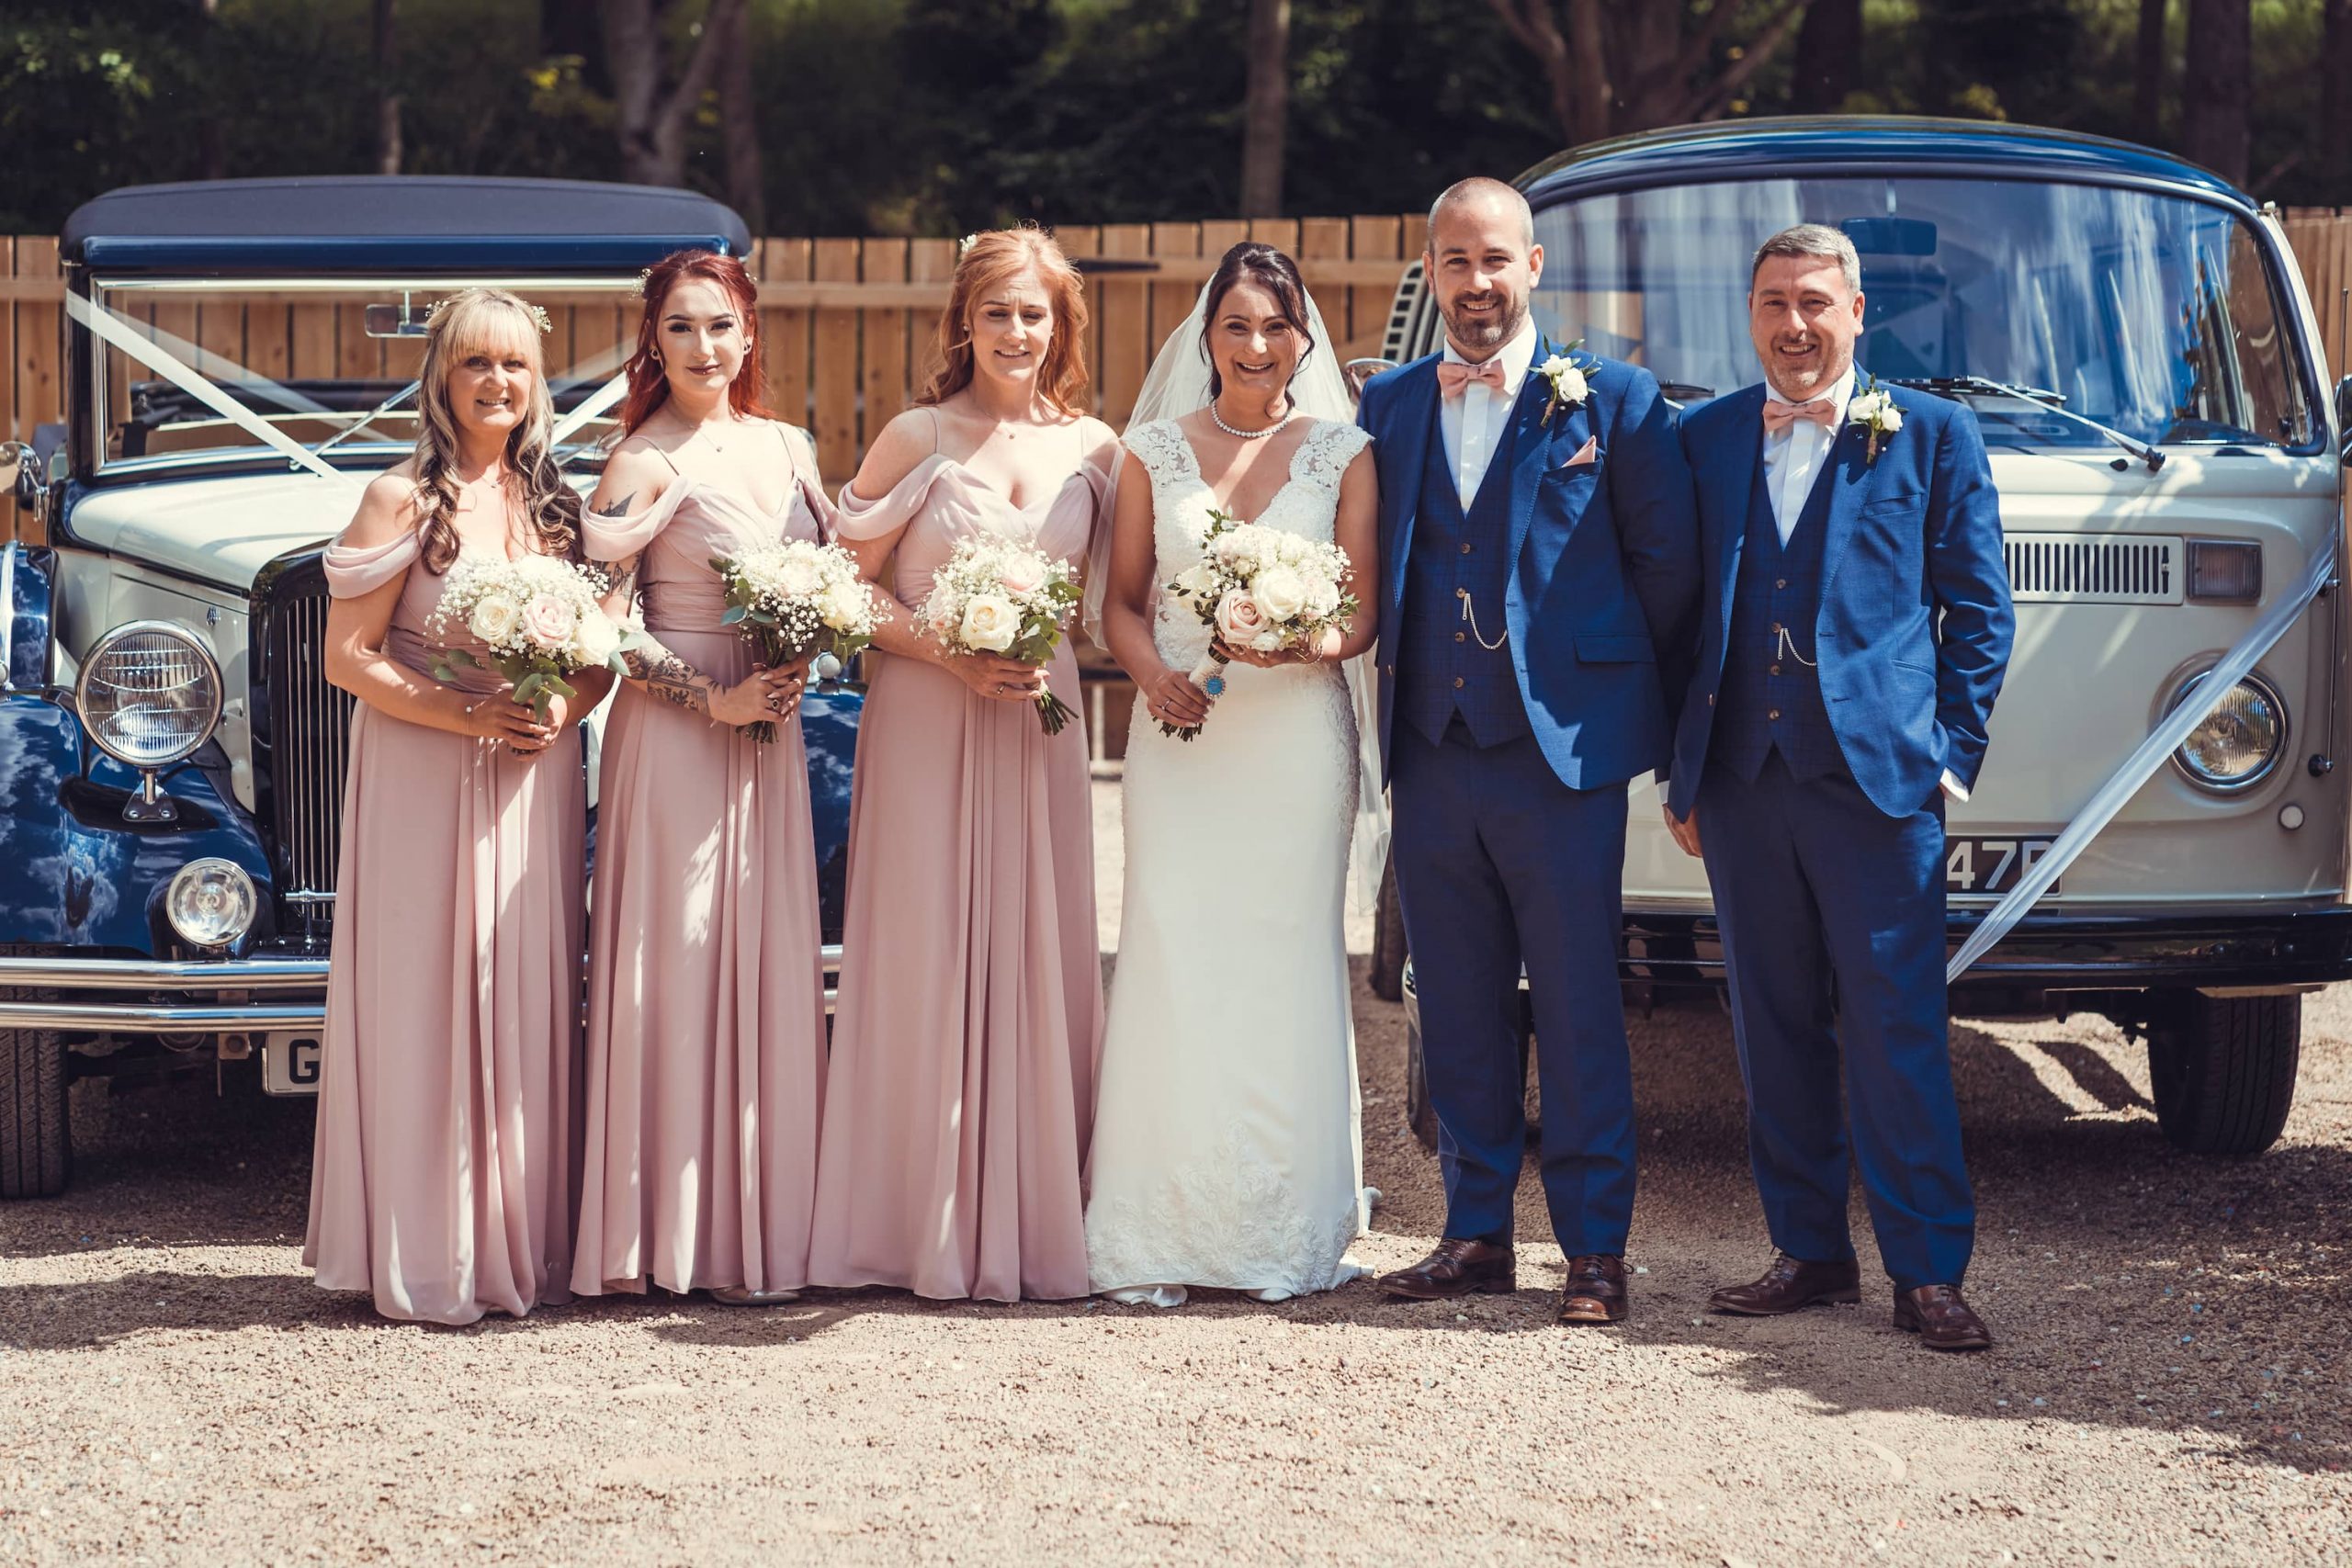 Tracy and Mark with Bridesmaids and Ushers